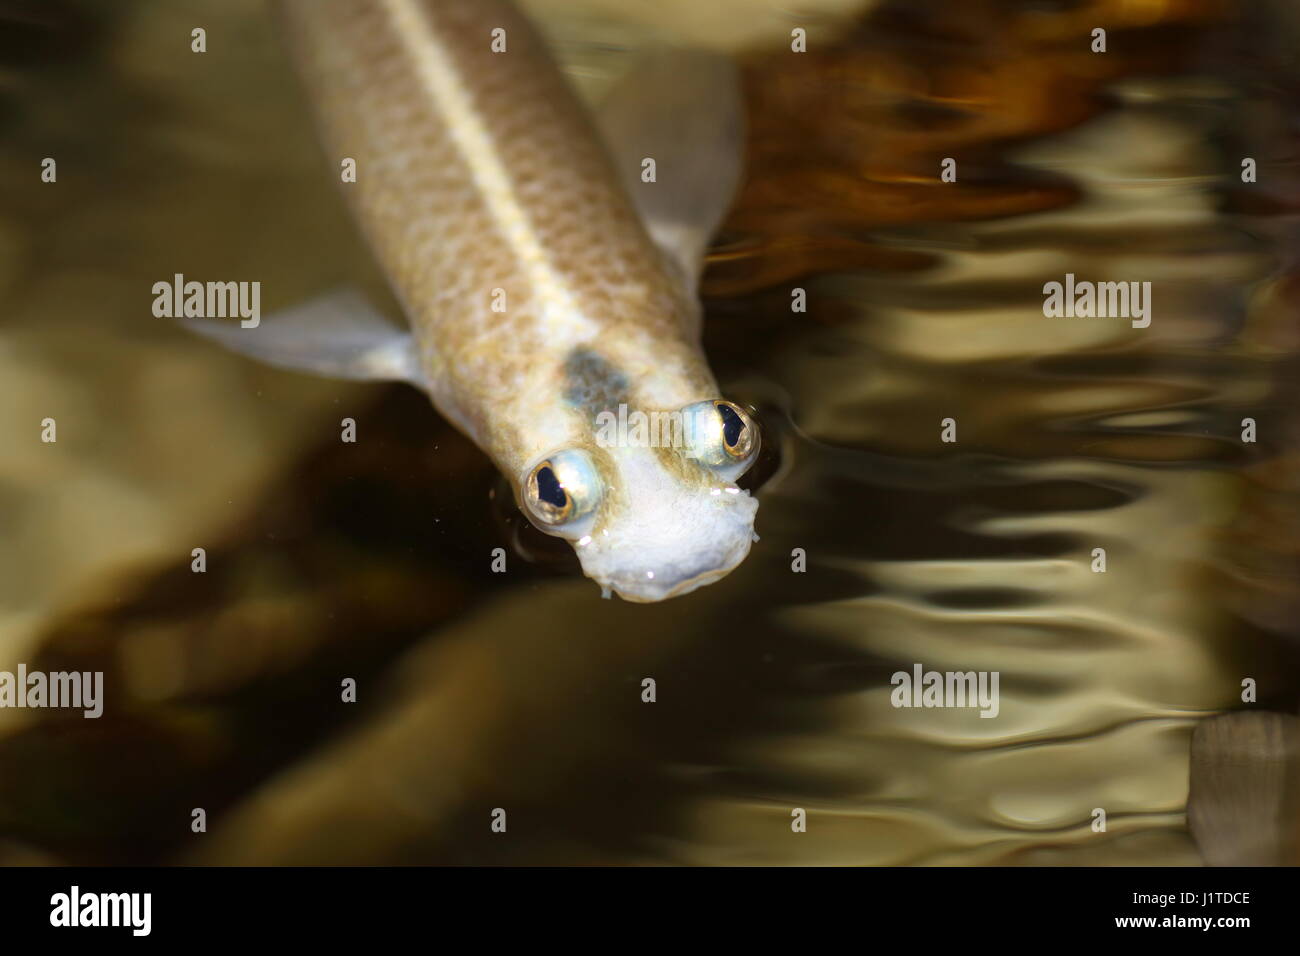 Four-eyed fish (Anableps anableps) in Amazon, South America Stock Photo